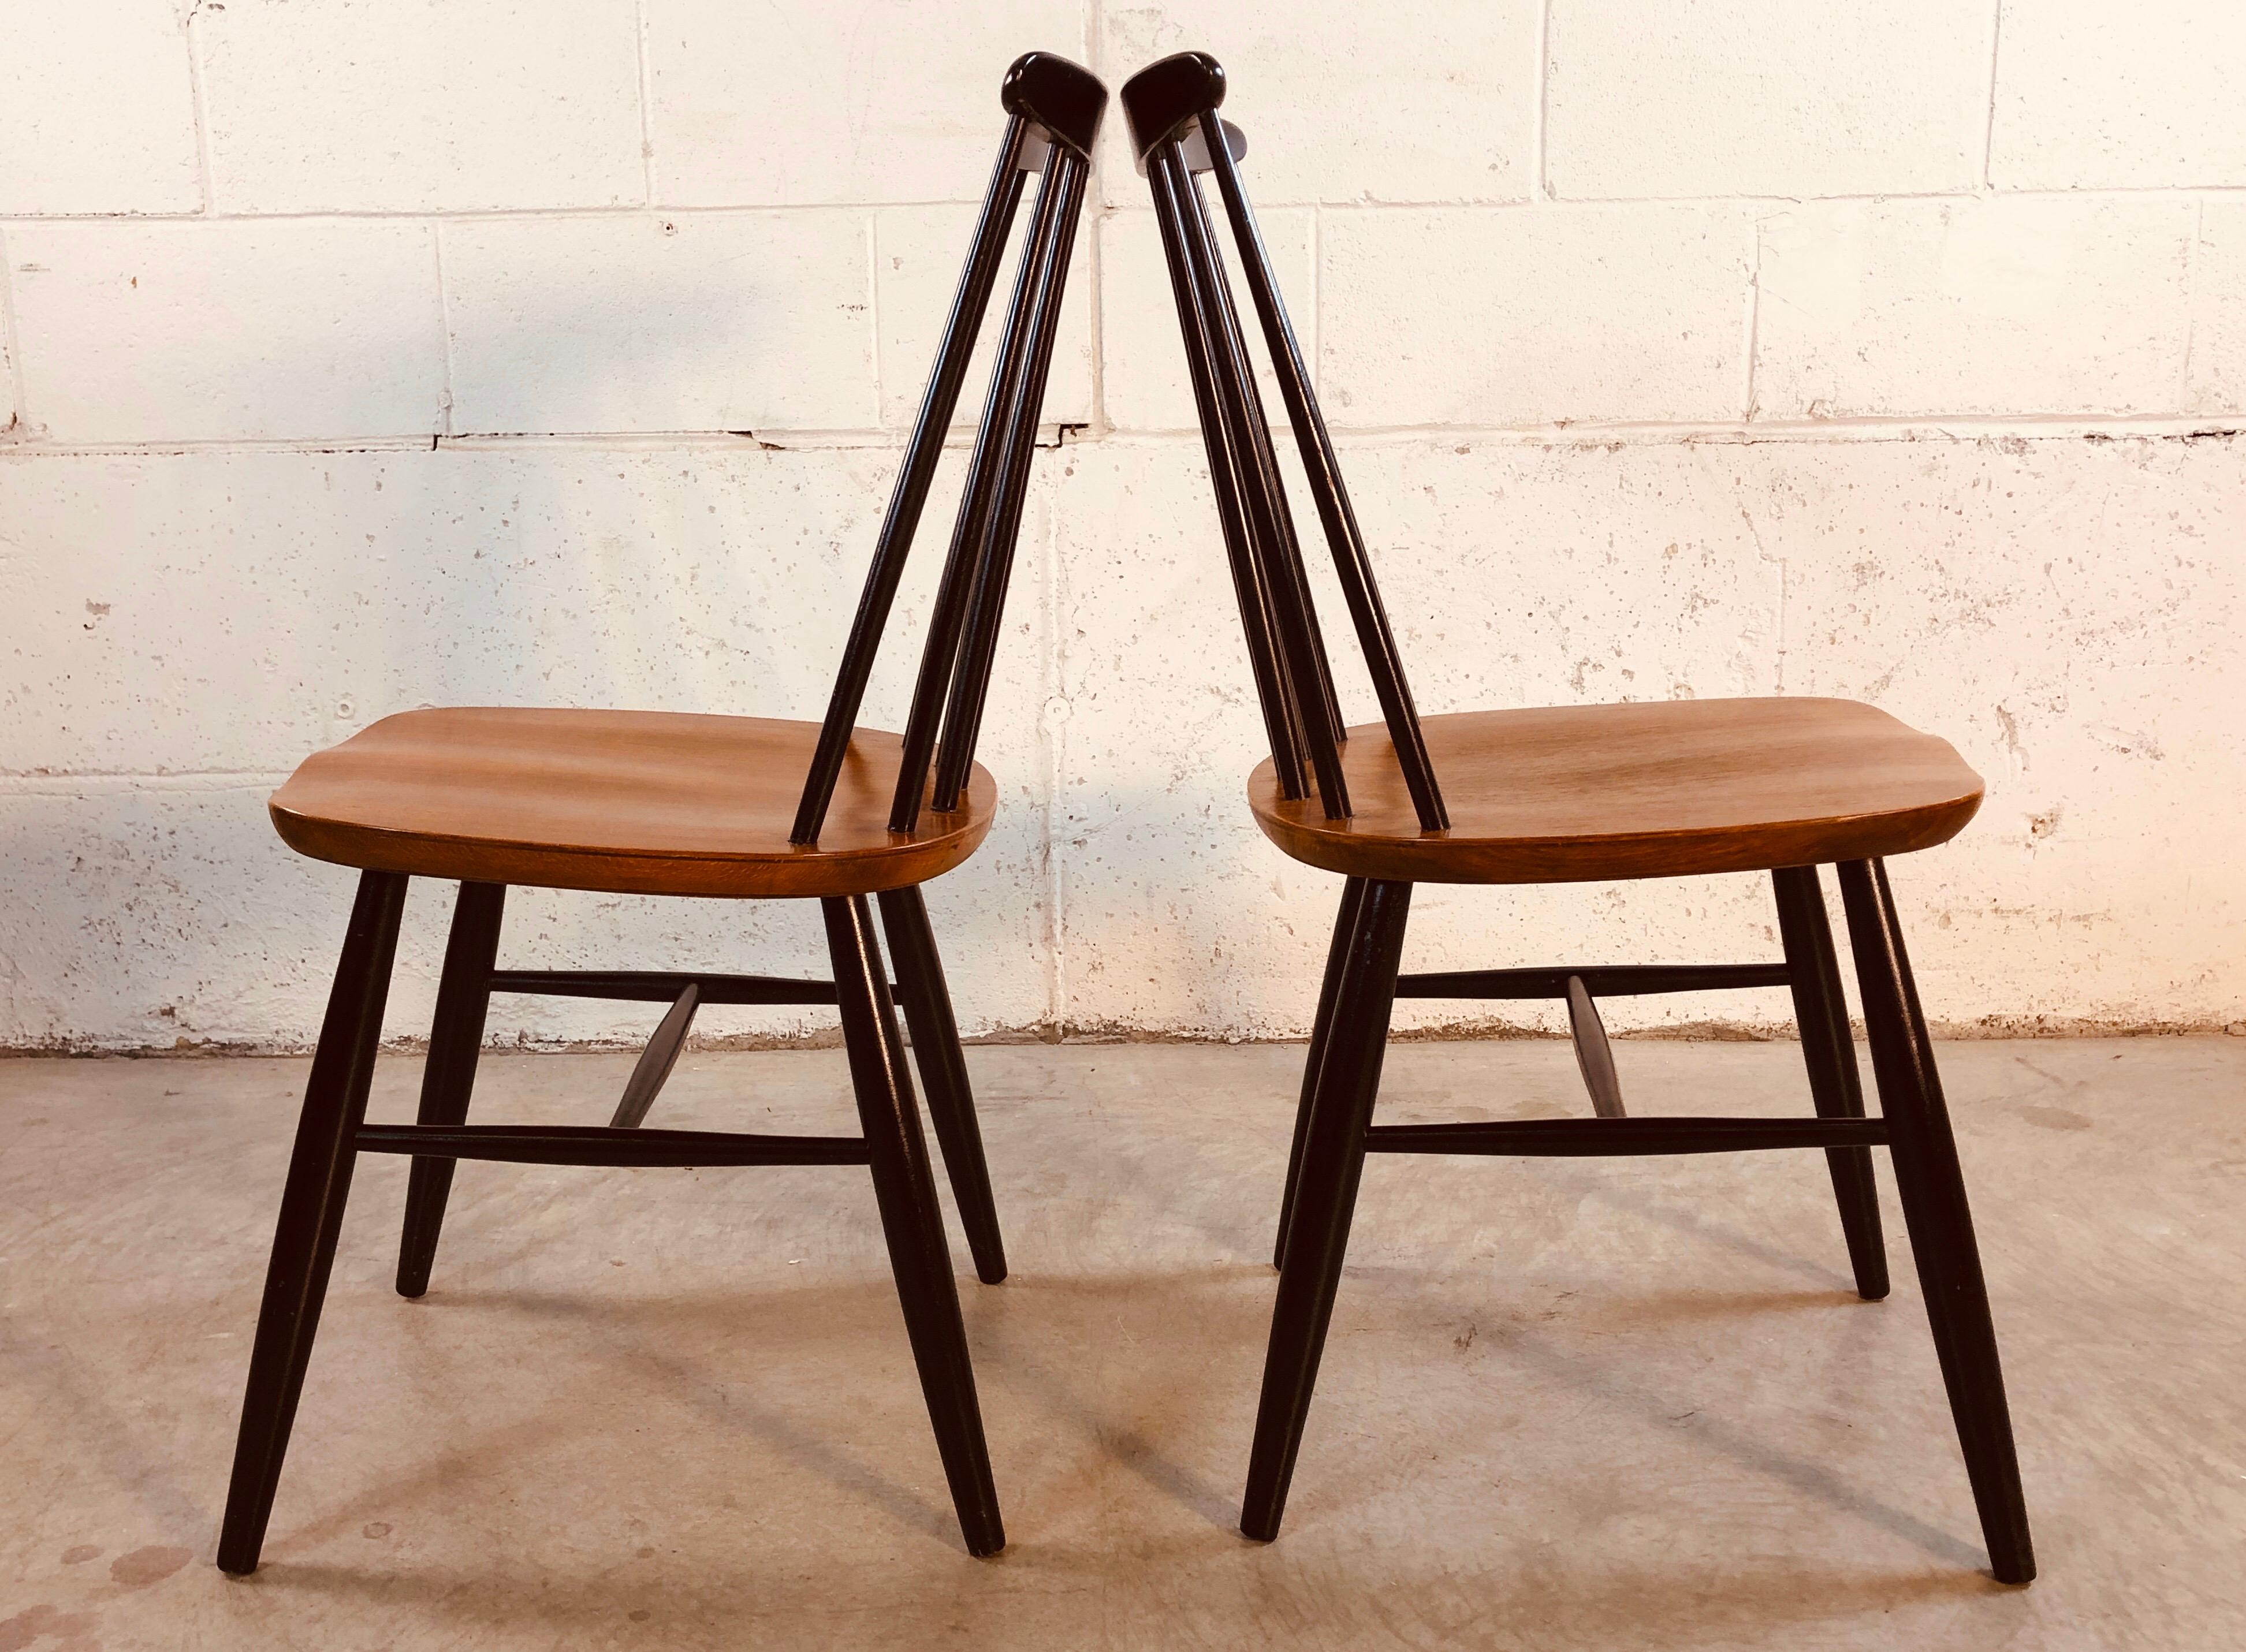 1960s Spindle Back Teak and Black Painted Chairs, Pair In Good Condition For Sale In Amherst, NH